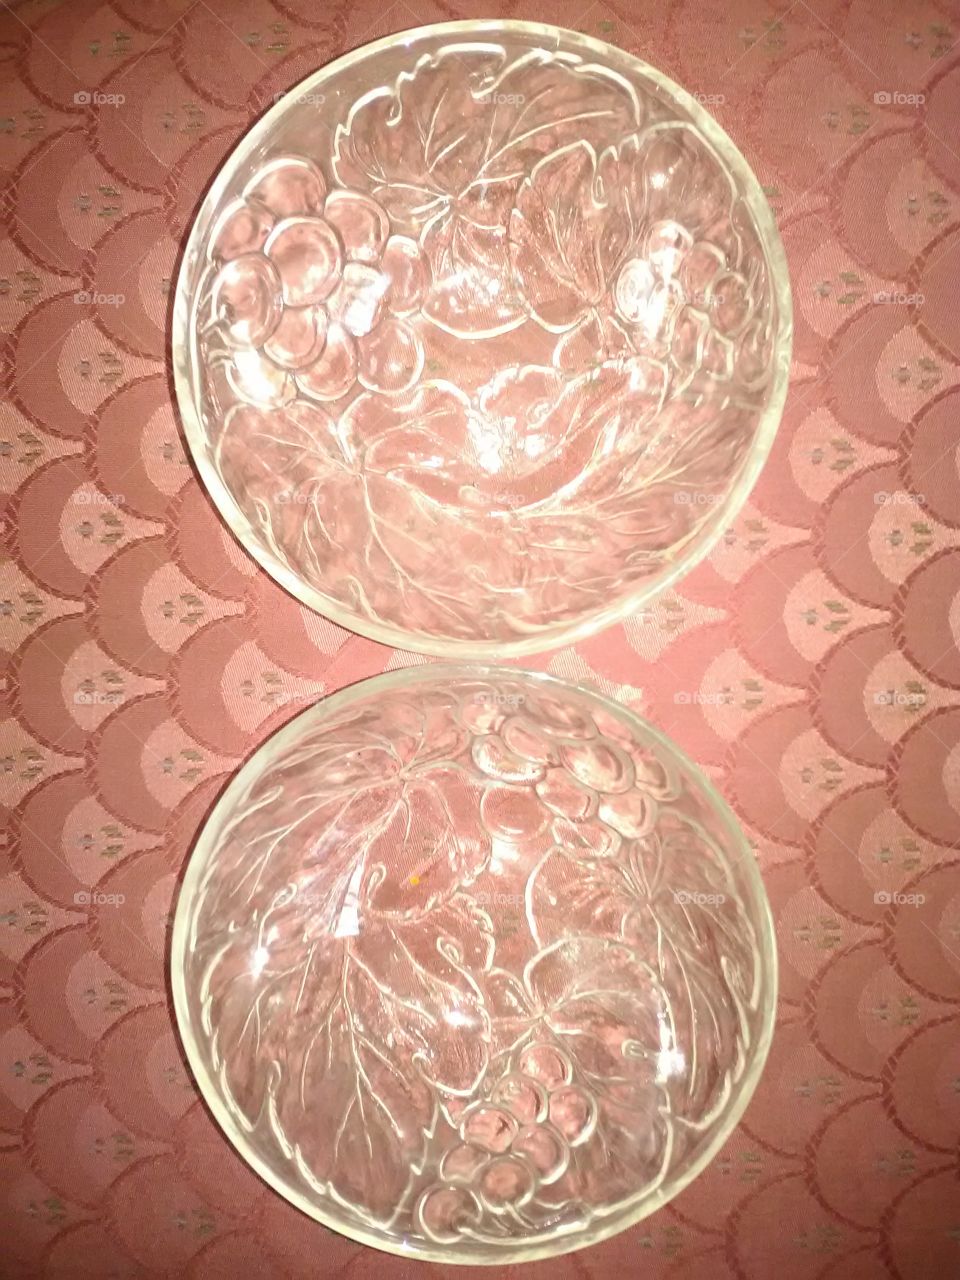 2 glass candy dishes with beef designs see-through last vintage 1970s